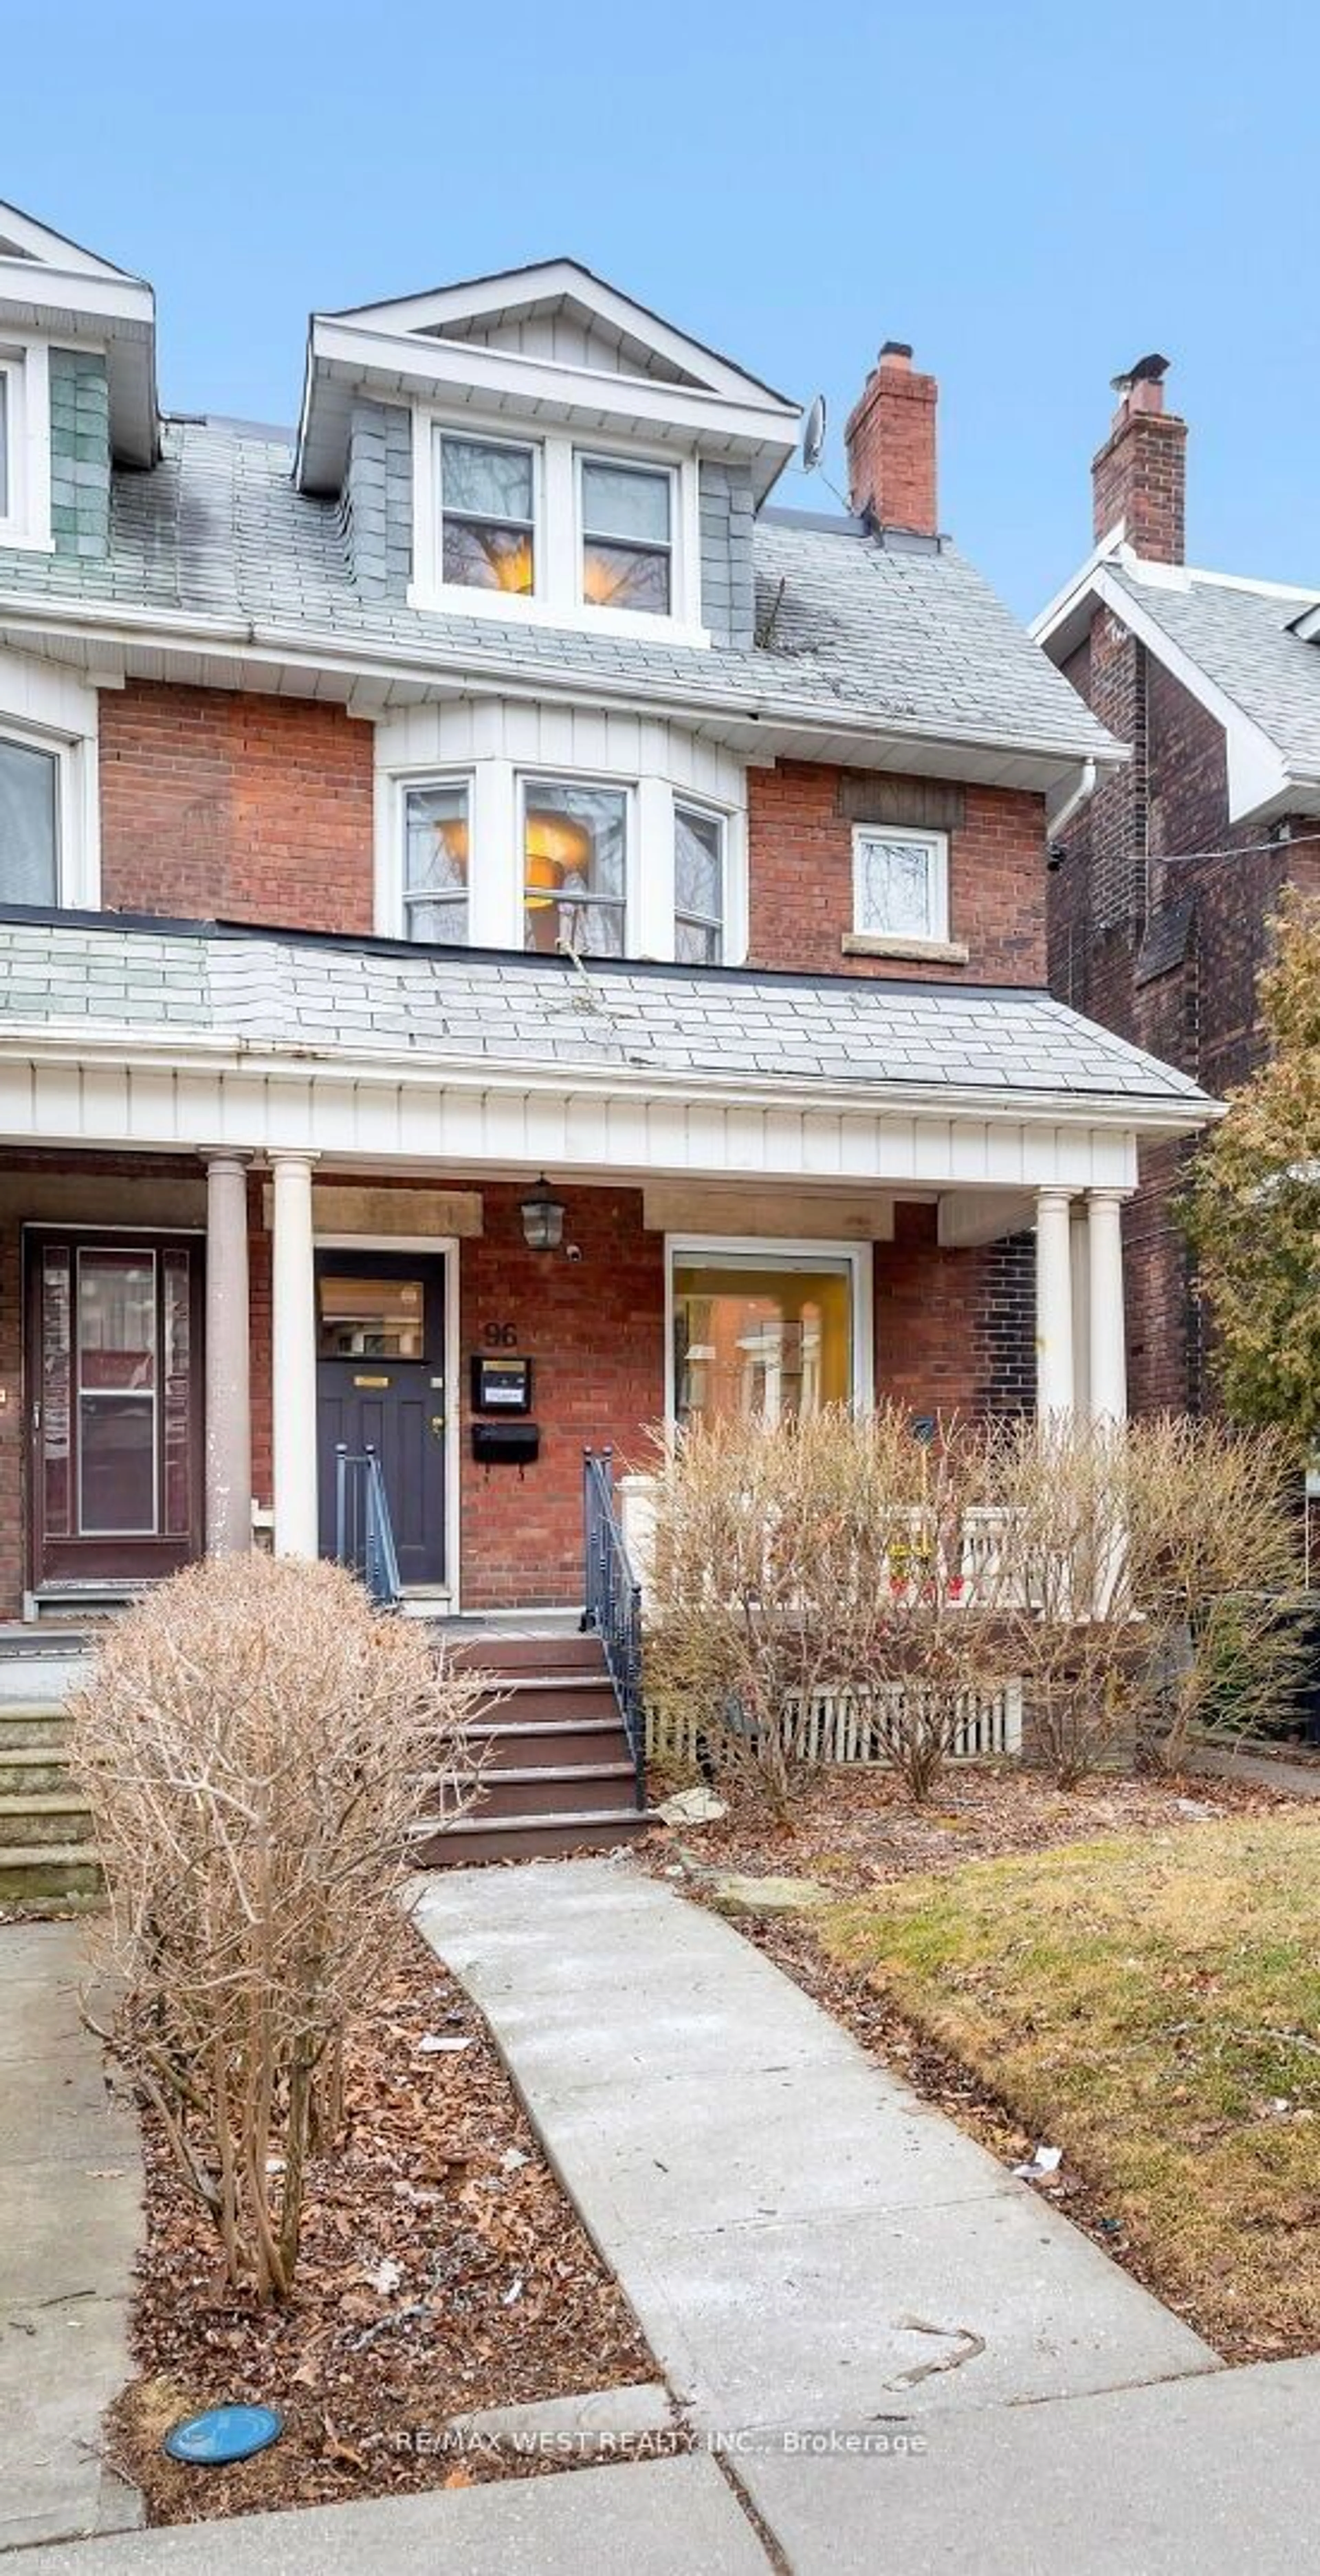 Home with brick exterior material for 96 Roncesvalles Ave, Toronto Ontario M6R 2K8